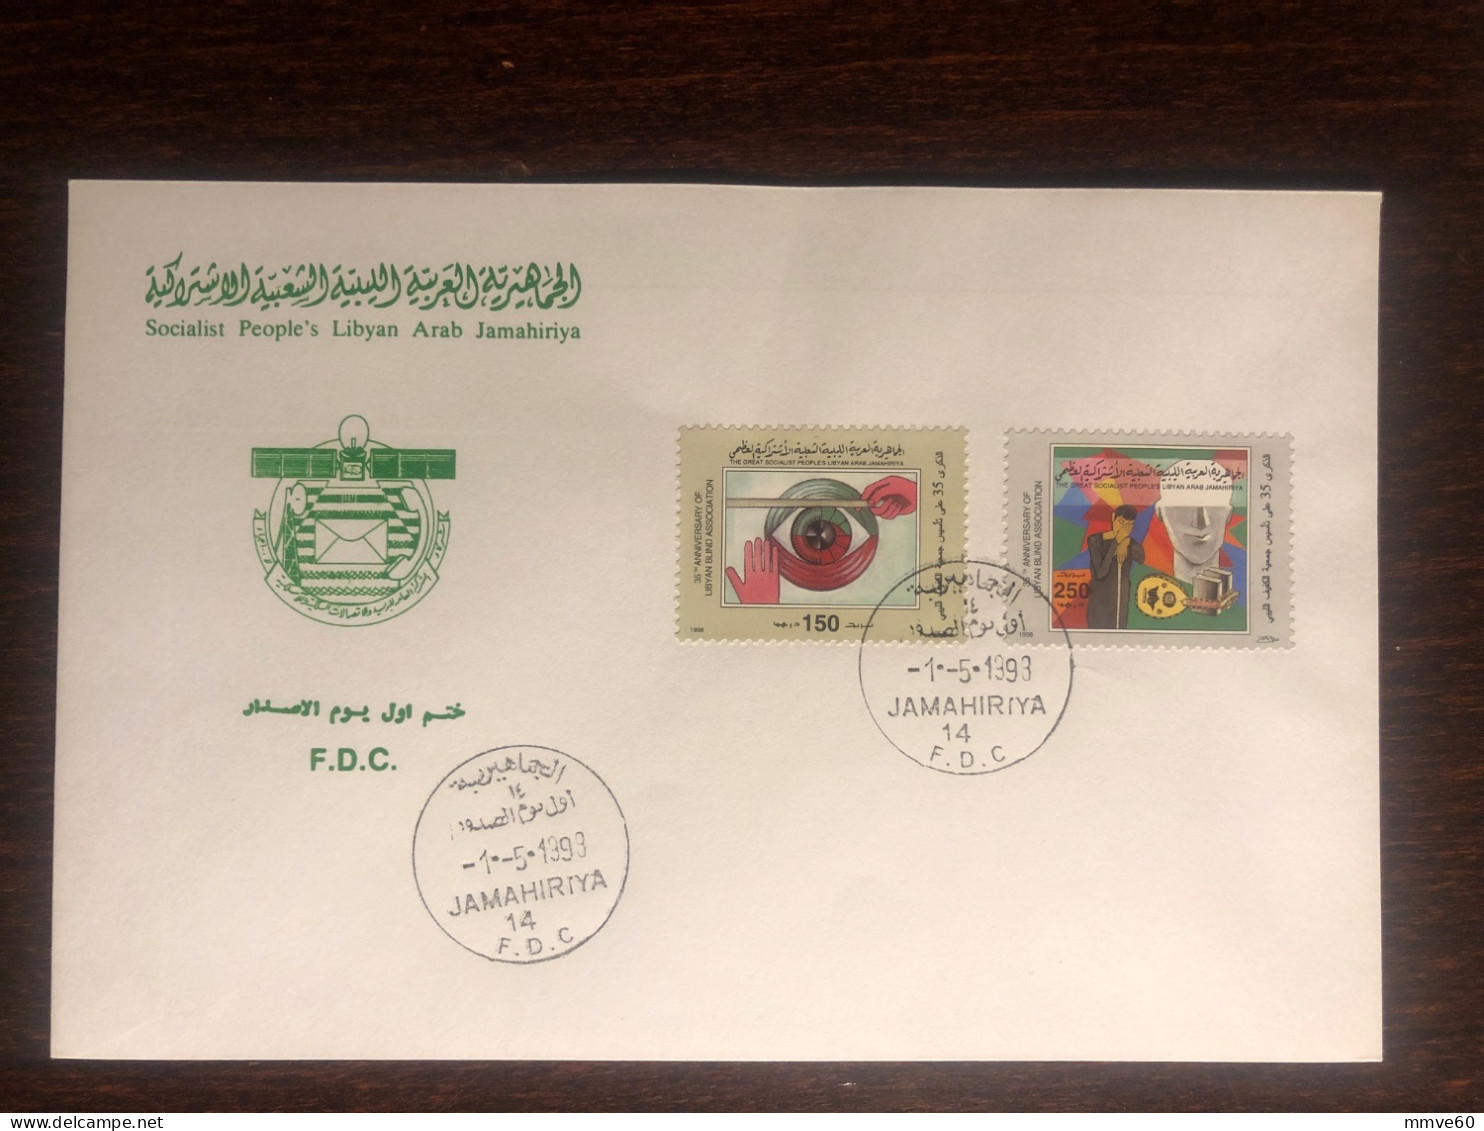 LIBYA  FDC COVER 1998 YEAR BLINDNESS BLIND HEALTH MEDICINE STAMPS - Libye